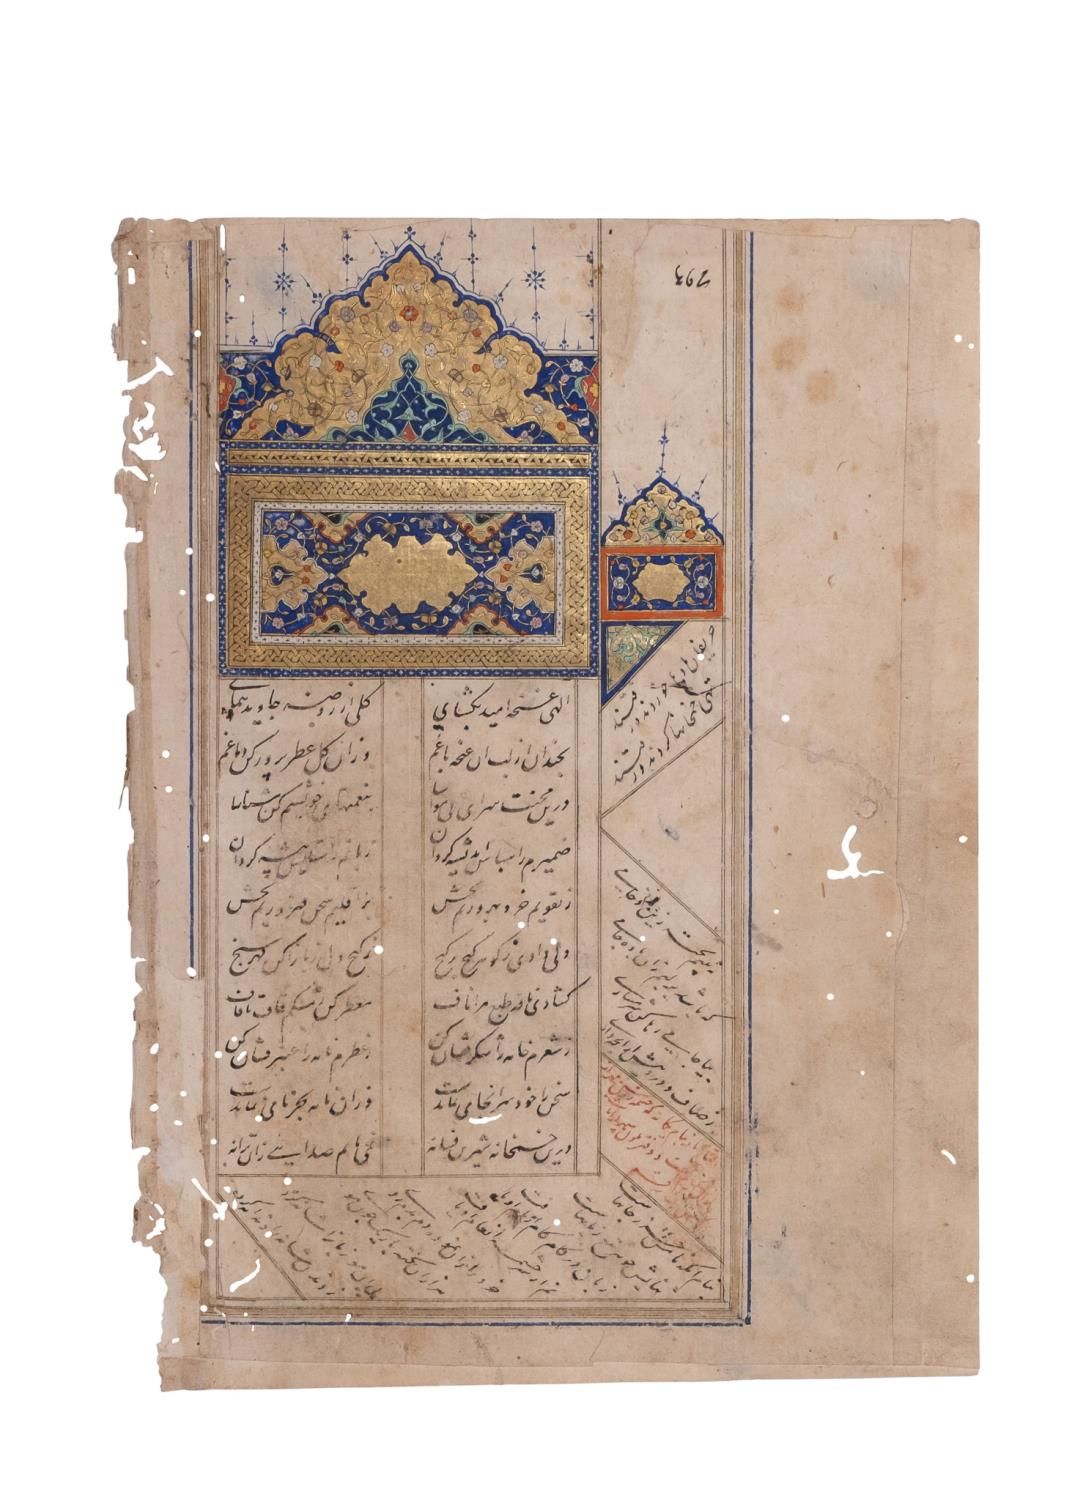 Null A PERSIAN POETRY FOLIO WITH A HEADPIECE, 19TH CENTURY
 
 Persian manuscript&hellip;